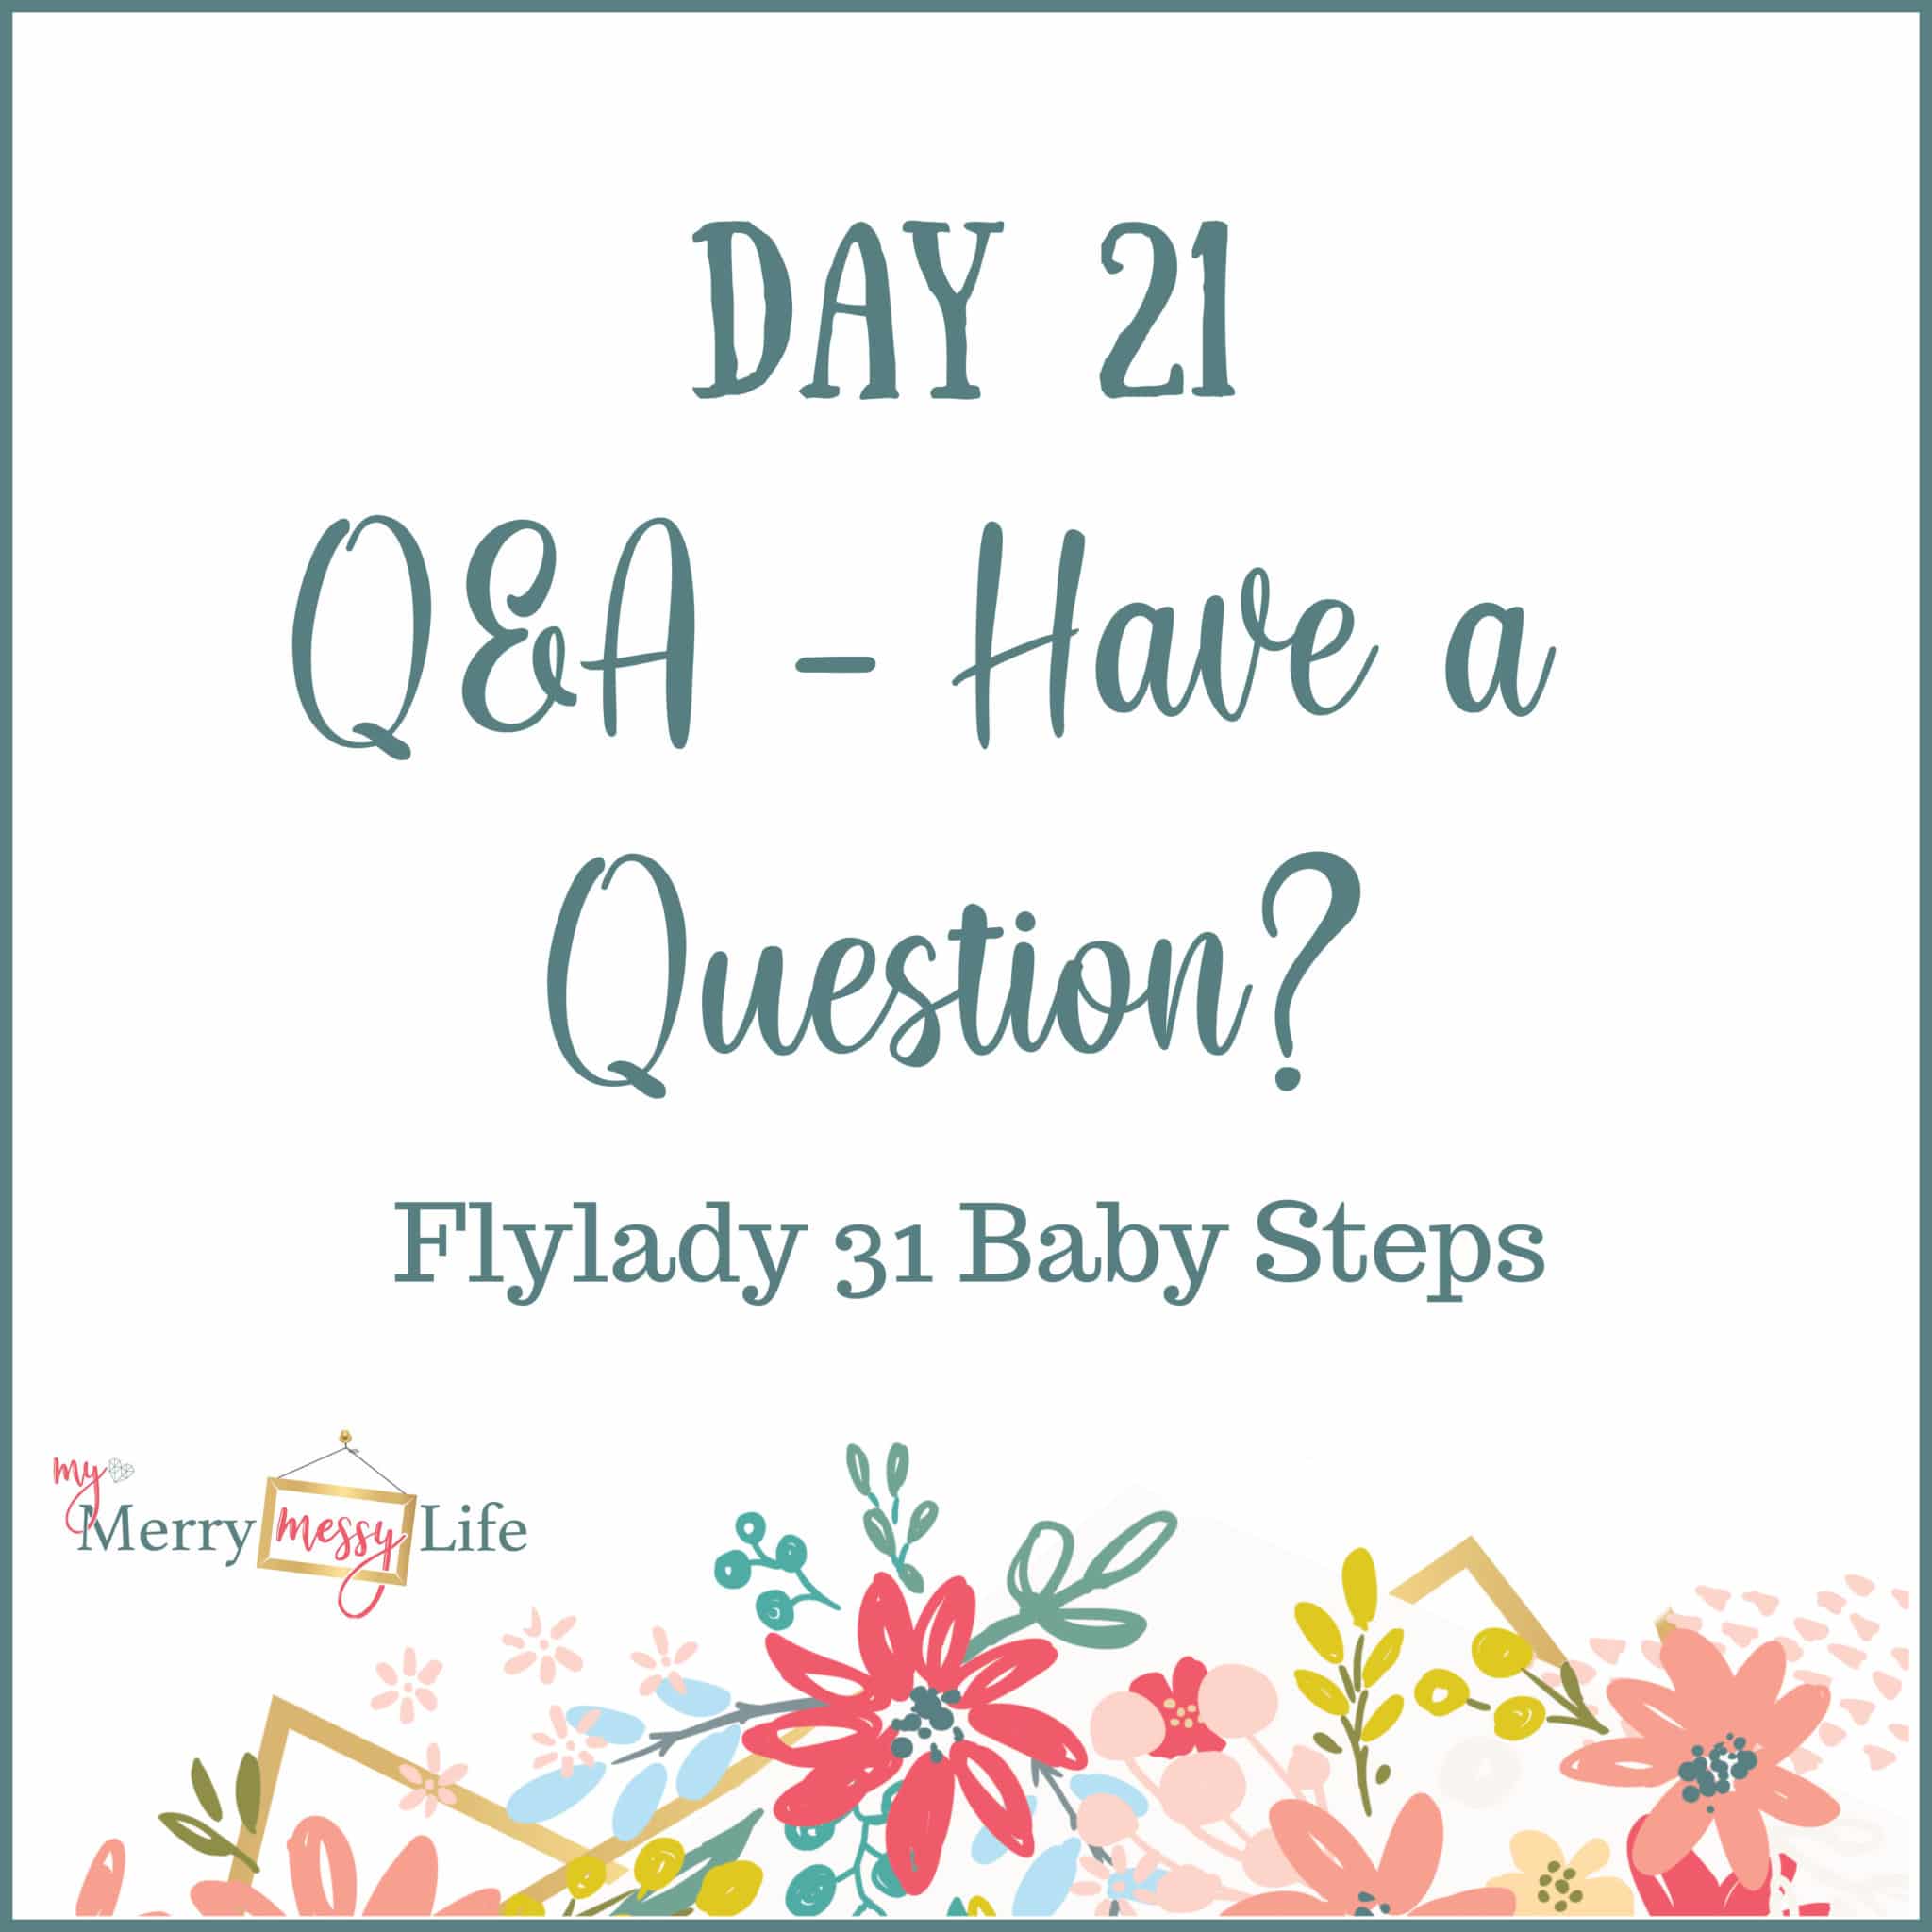 Flylady 31 Baby Steps - Day 21 - Q&A - Ask Questions Time